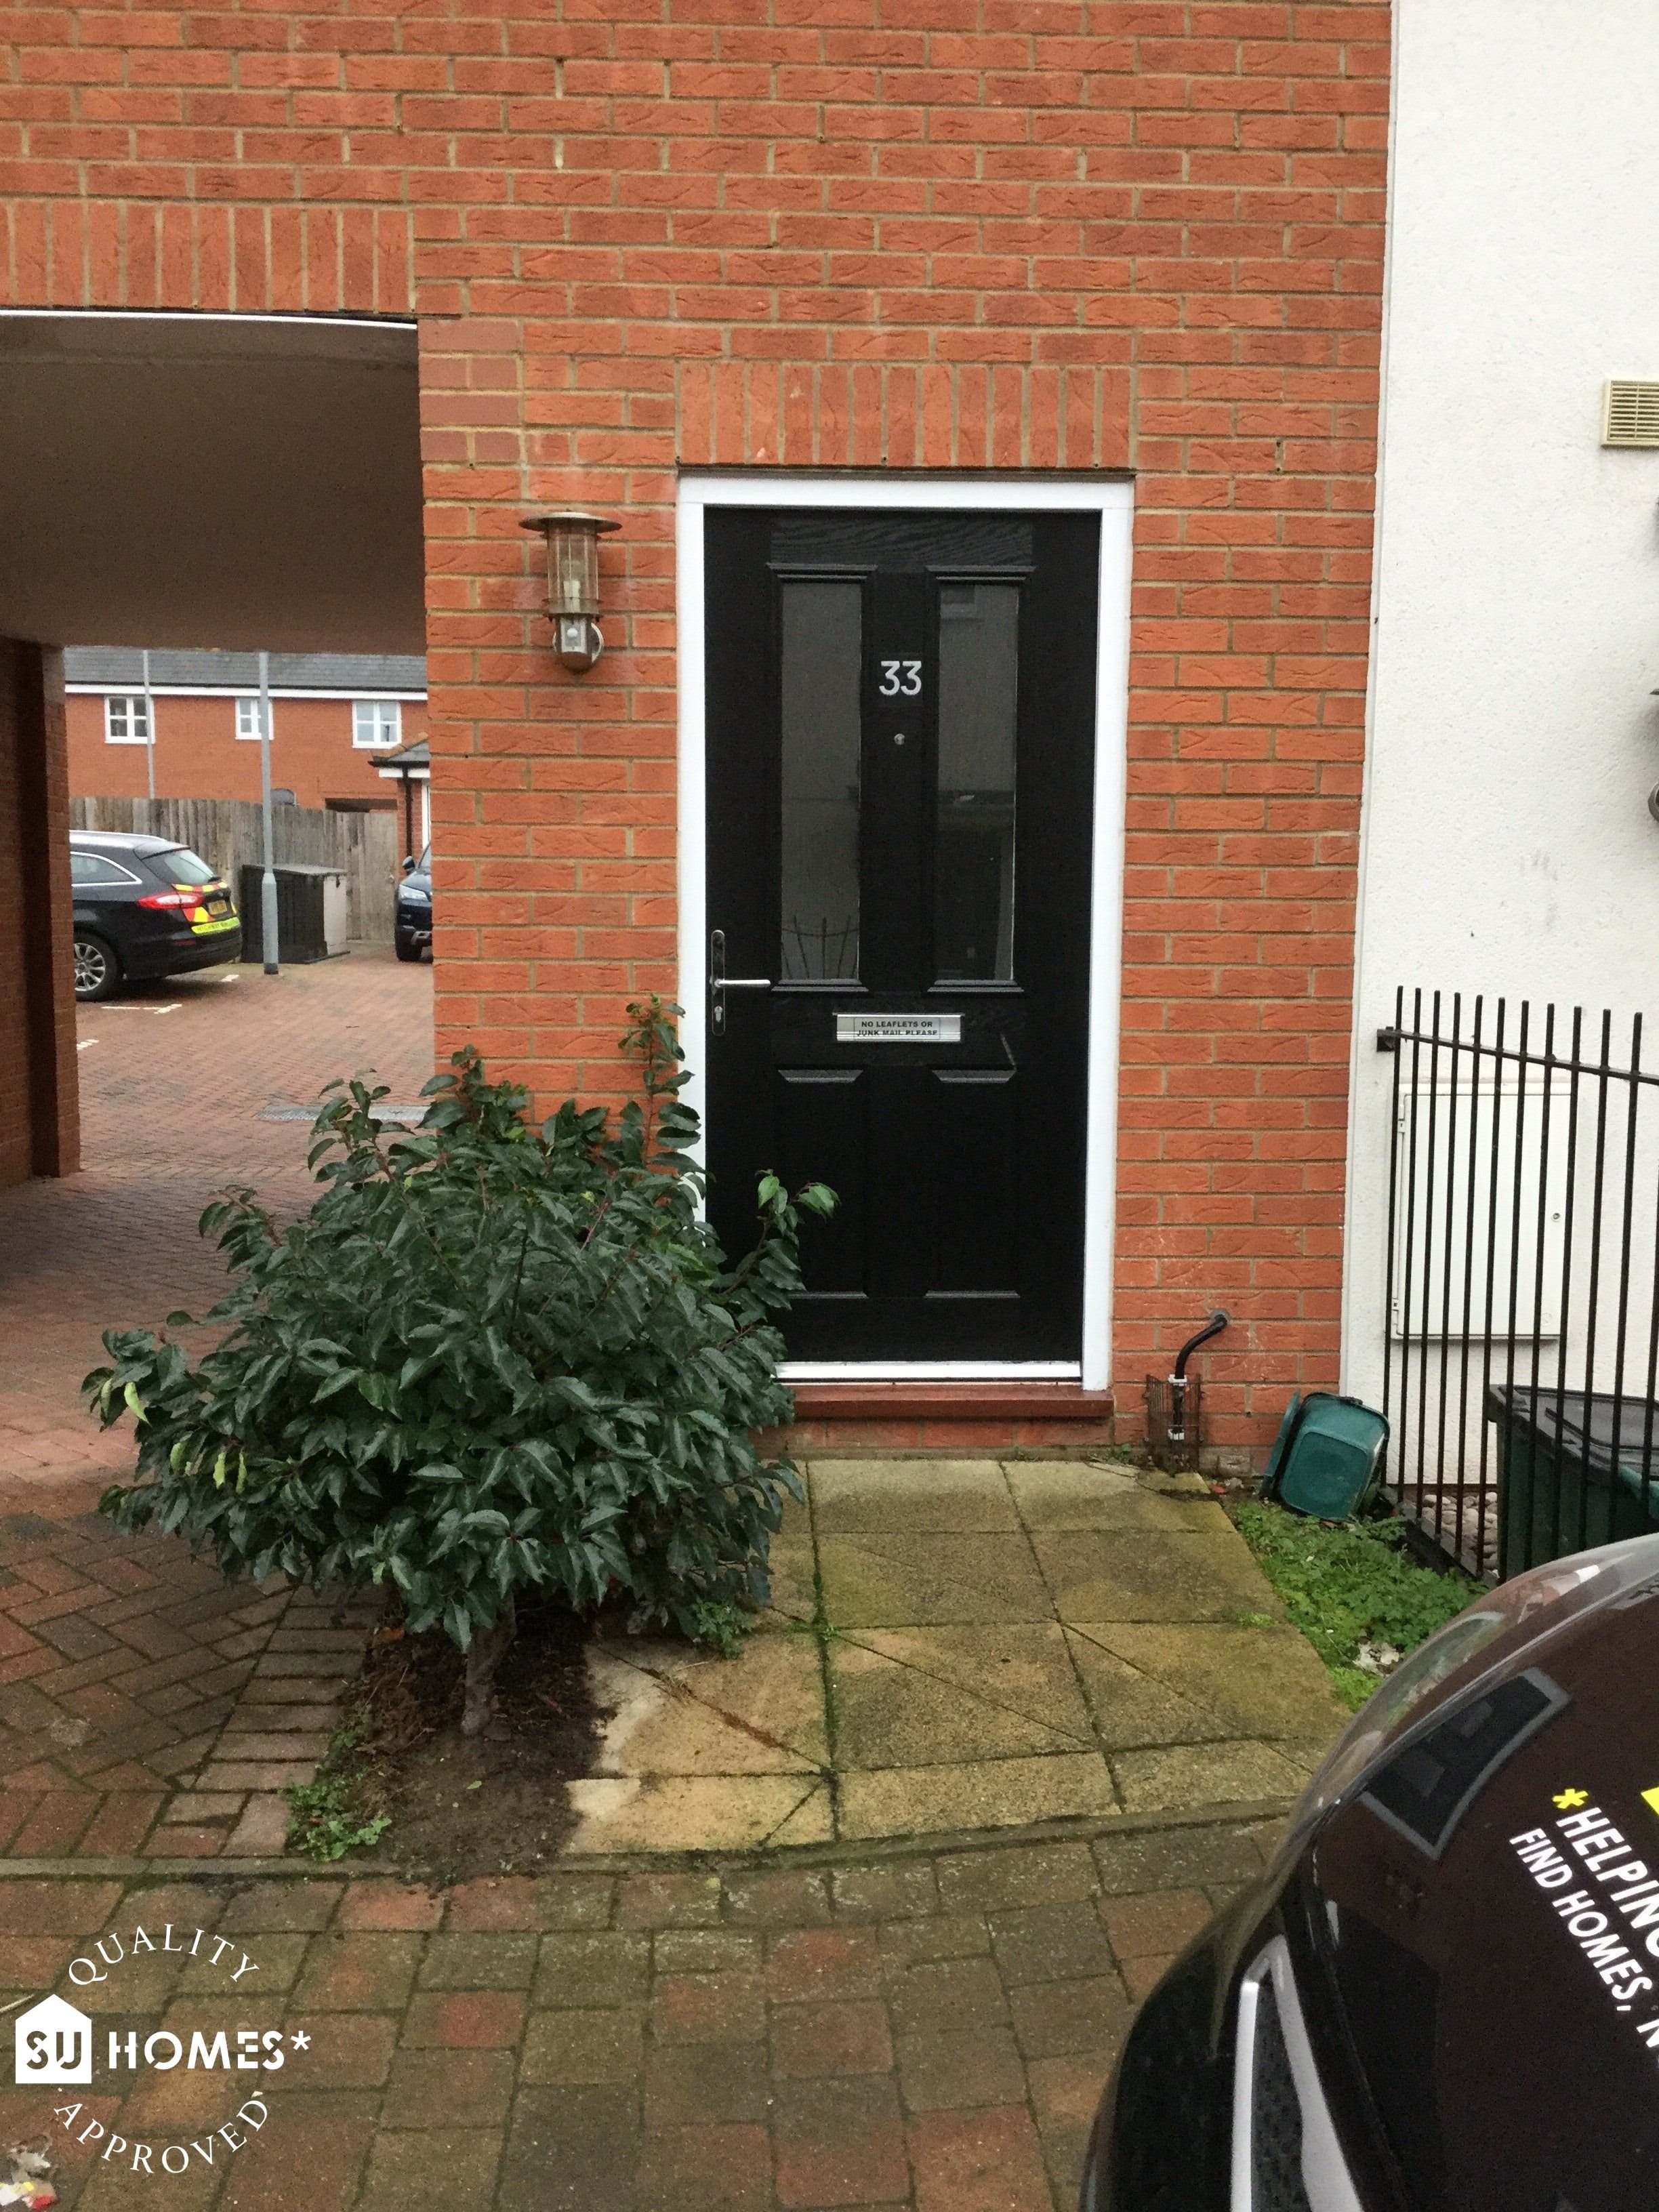 2 bed maisonette to rent in Lenz Close, Colchester, CO1 